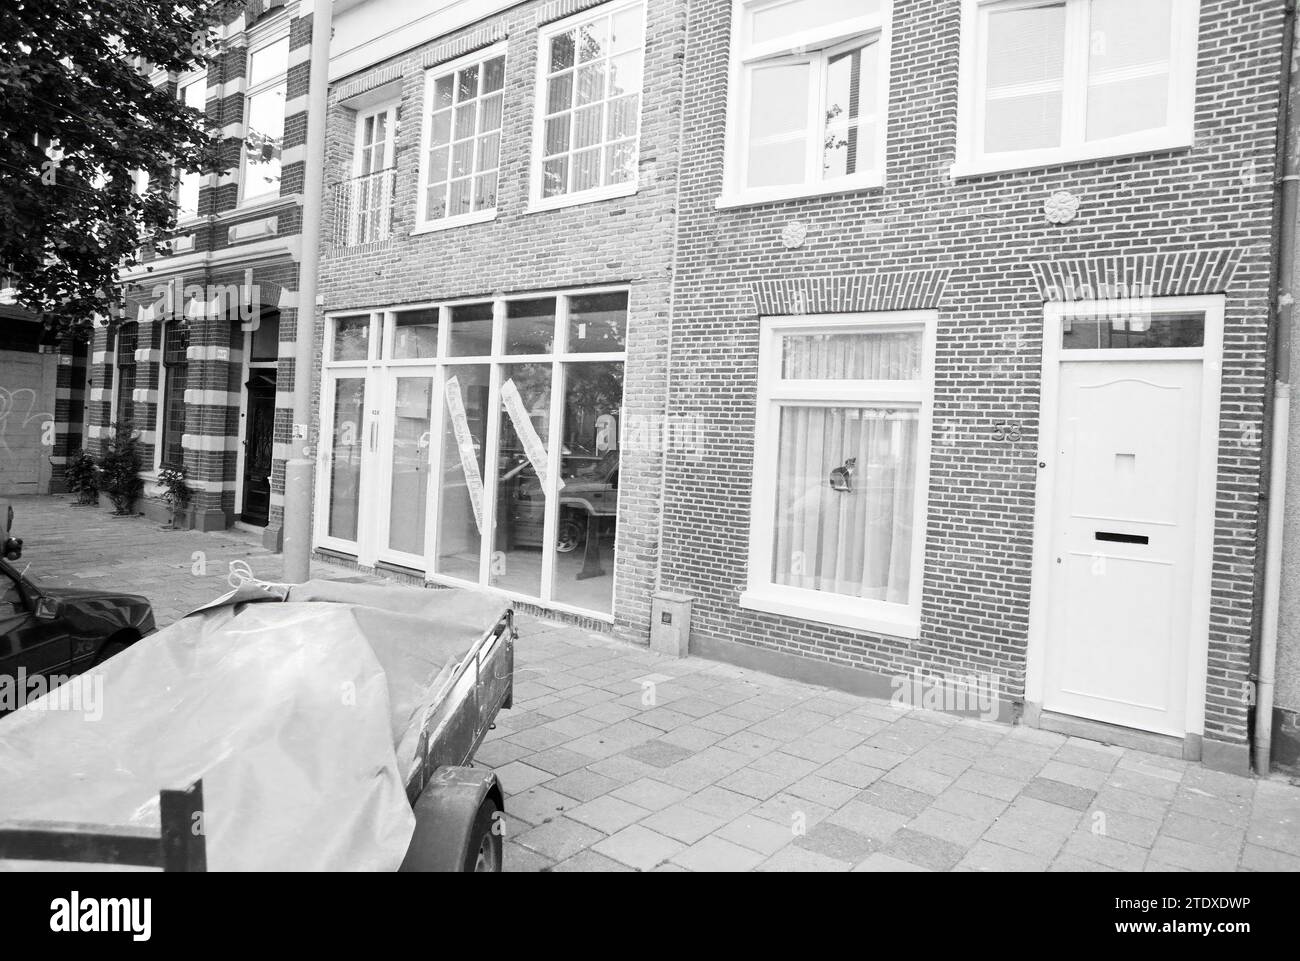 Illegally renovated, Nassaulaan 60-62, Haarlem, Nassaulaan, The Netherlands, 18-08-1993, Whizgle News from the Past, Tailored for the Future. Explore historical narratives, Dutch The Netherlands agency image with a modern perspective, bridging the gap between yesterday's events and tomorrow's insights. A timeless journey shaping the stories that shape our future. Stock Photo